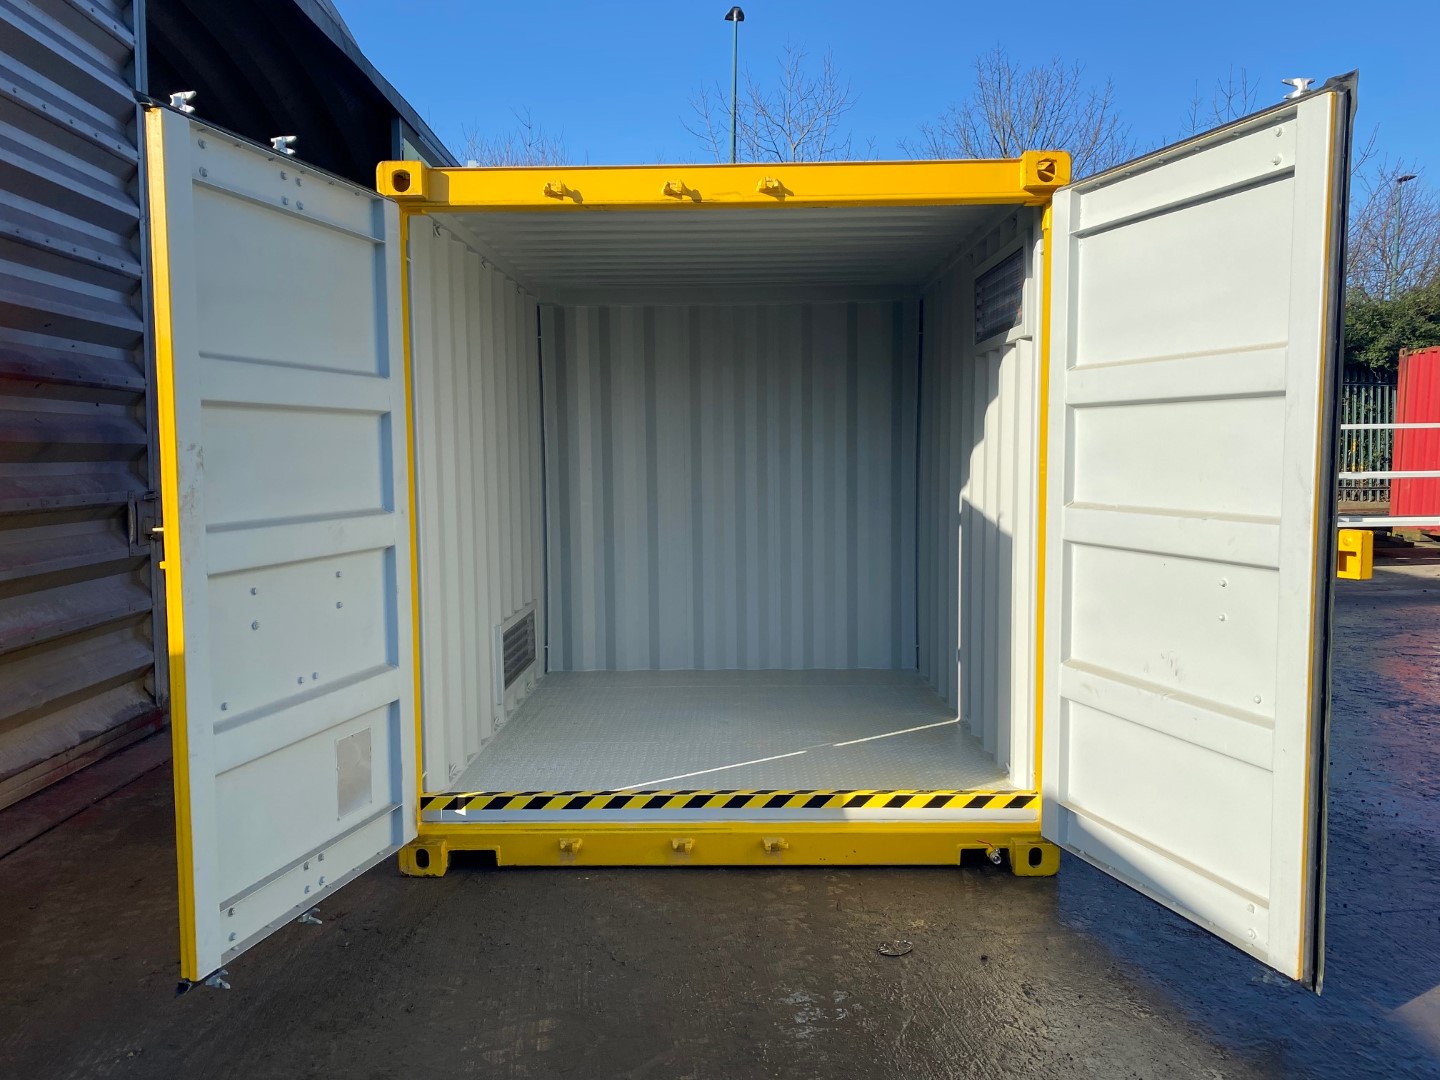 Providers of Bunded Chemical Storage Containers UK